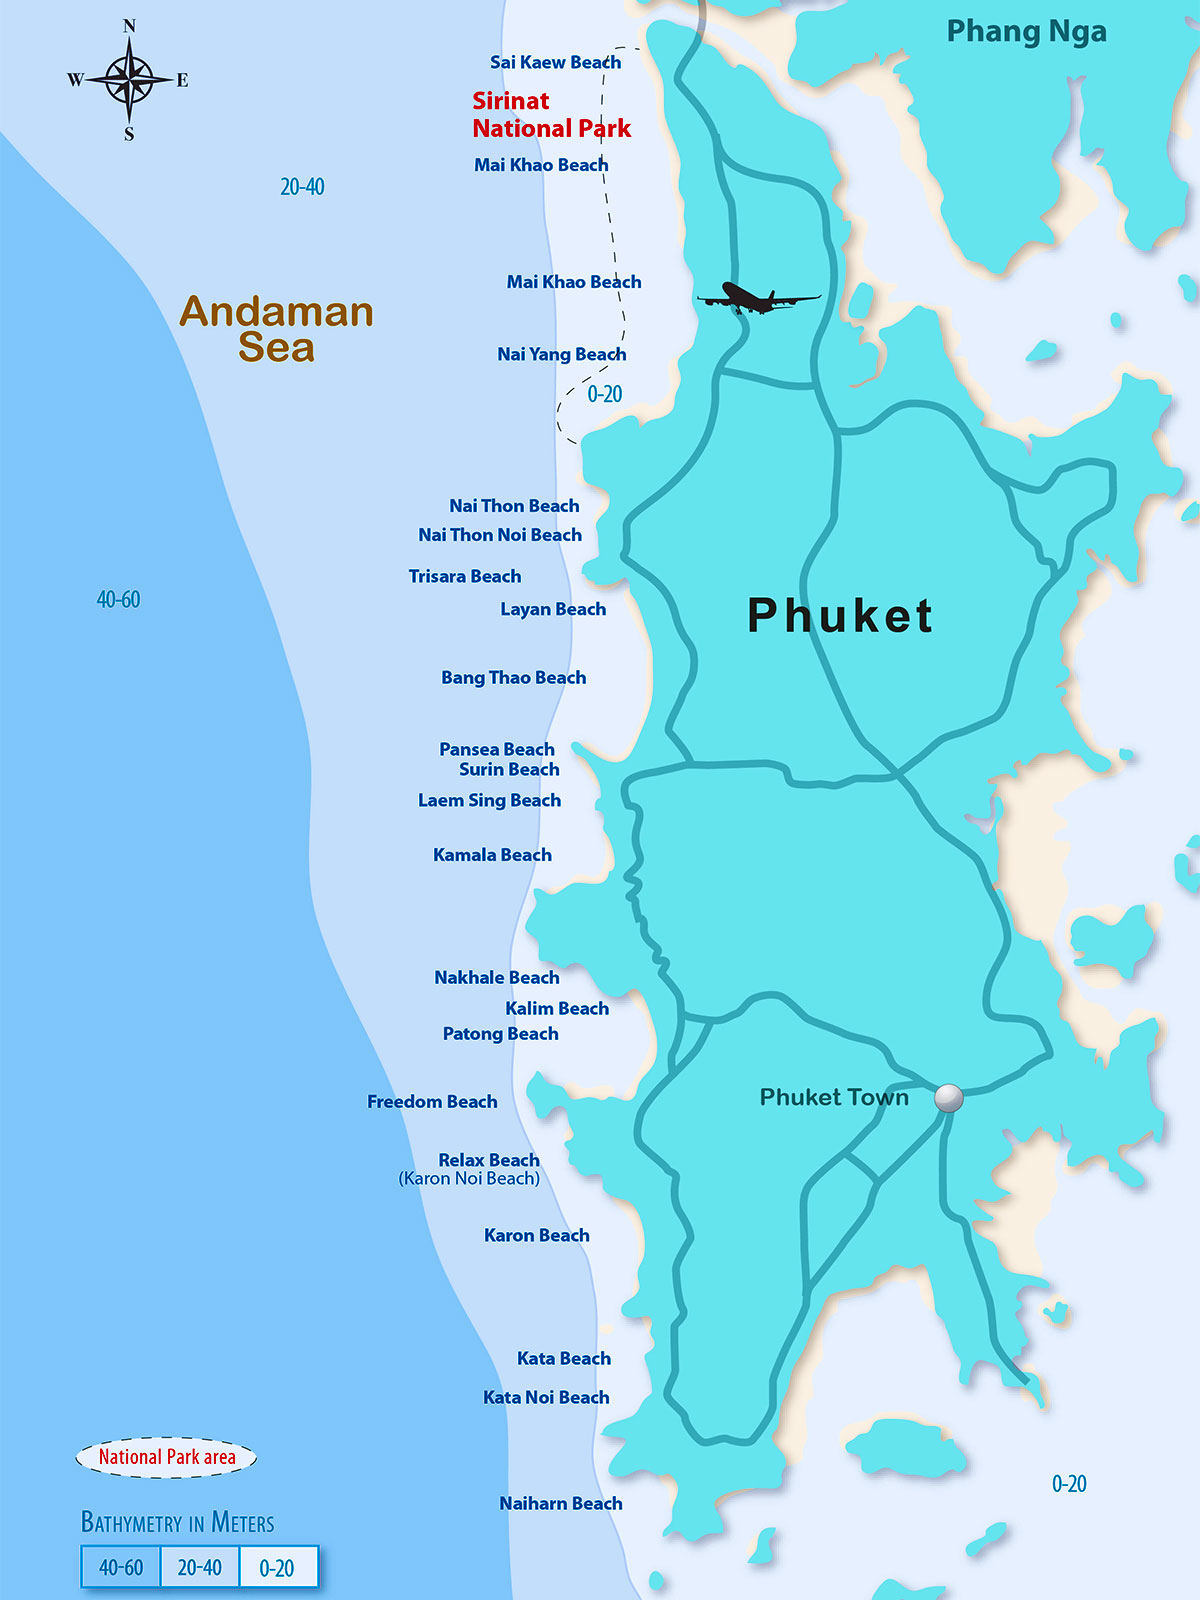 Bathymetry | Surf Map Phuket | Surf Resource Sustainability Index | Dr Steven Andrew Martin | Surf Thailand | Tourism Research